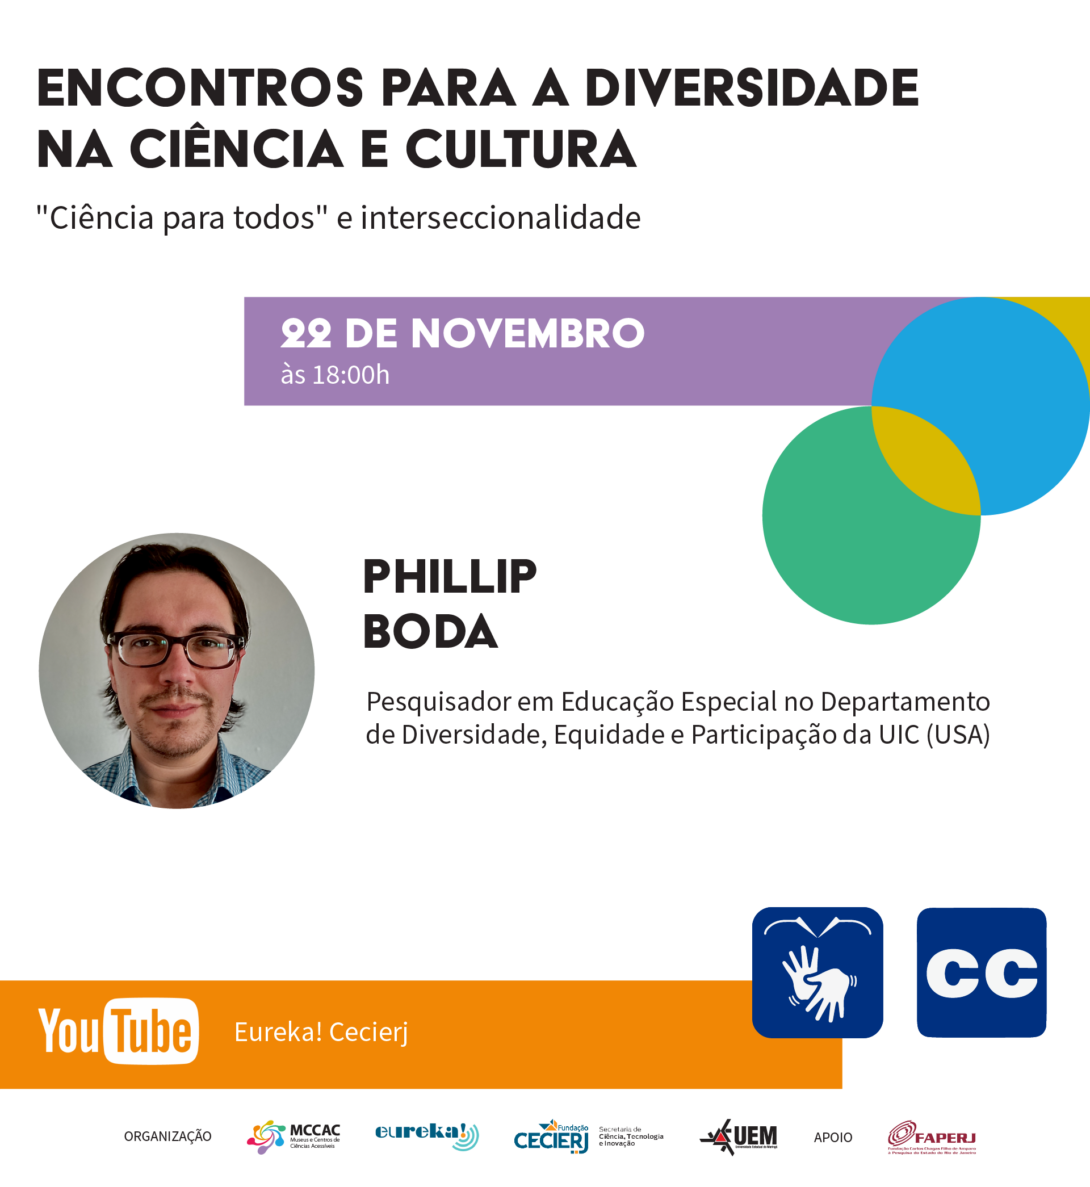 Flyer with Dr. Boda appearing on the left side with colorful shapes for style. There are Portuguese descriptions of the time and place of the lecture online.